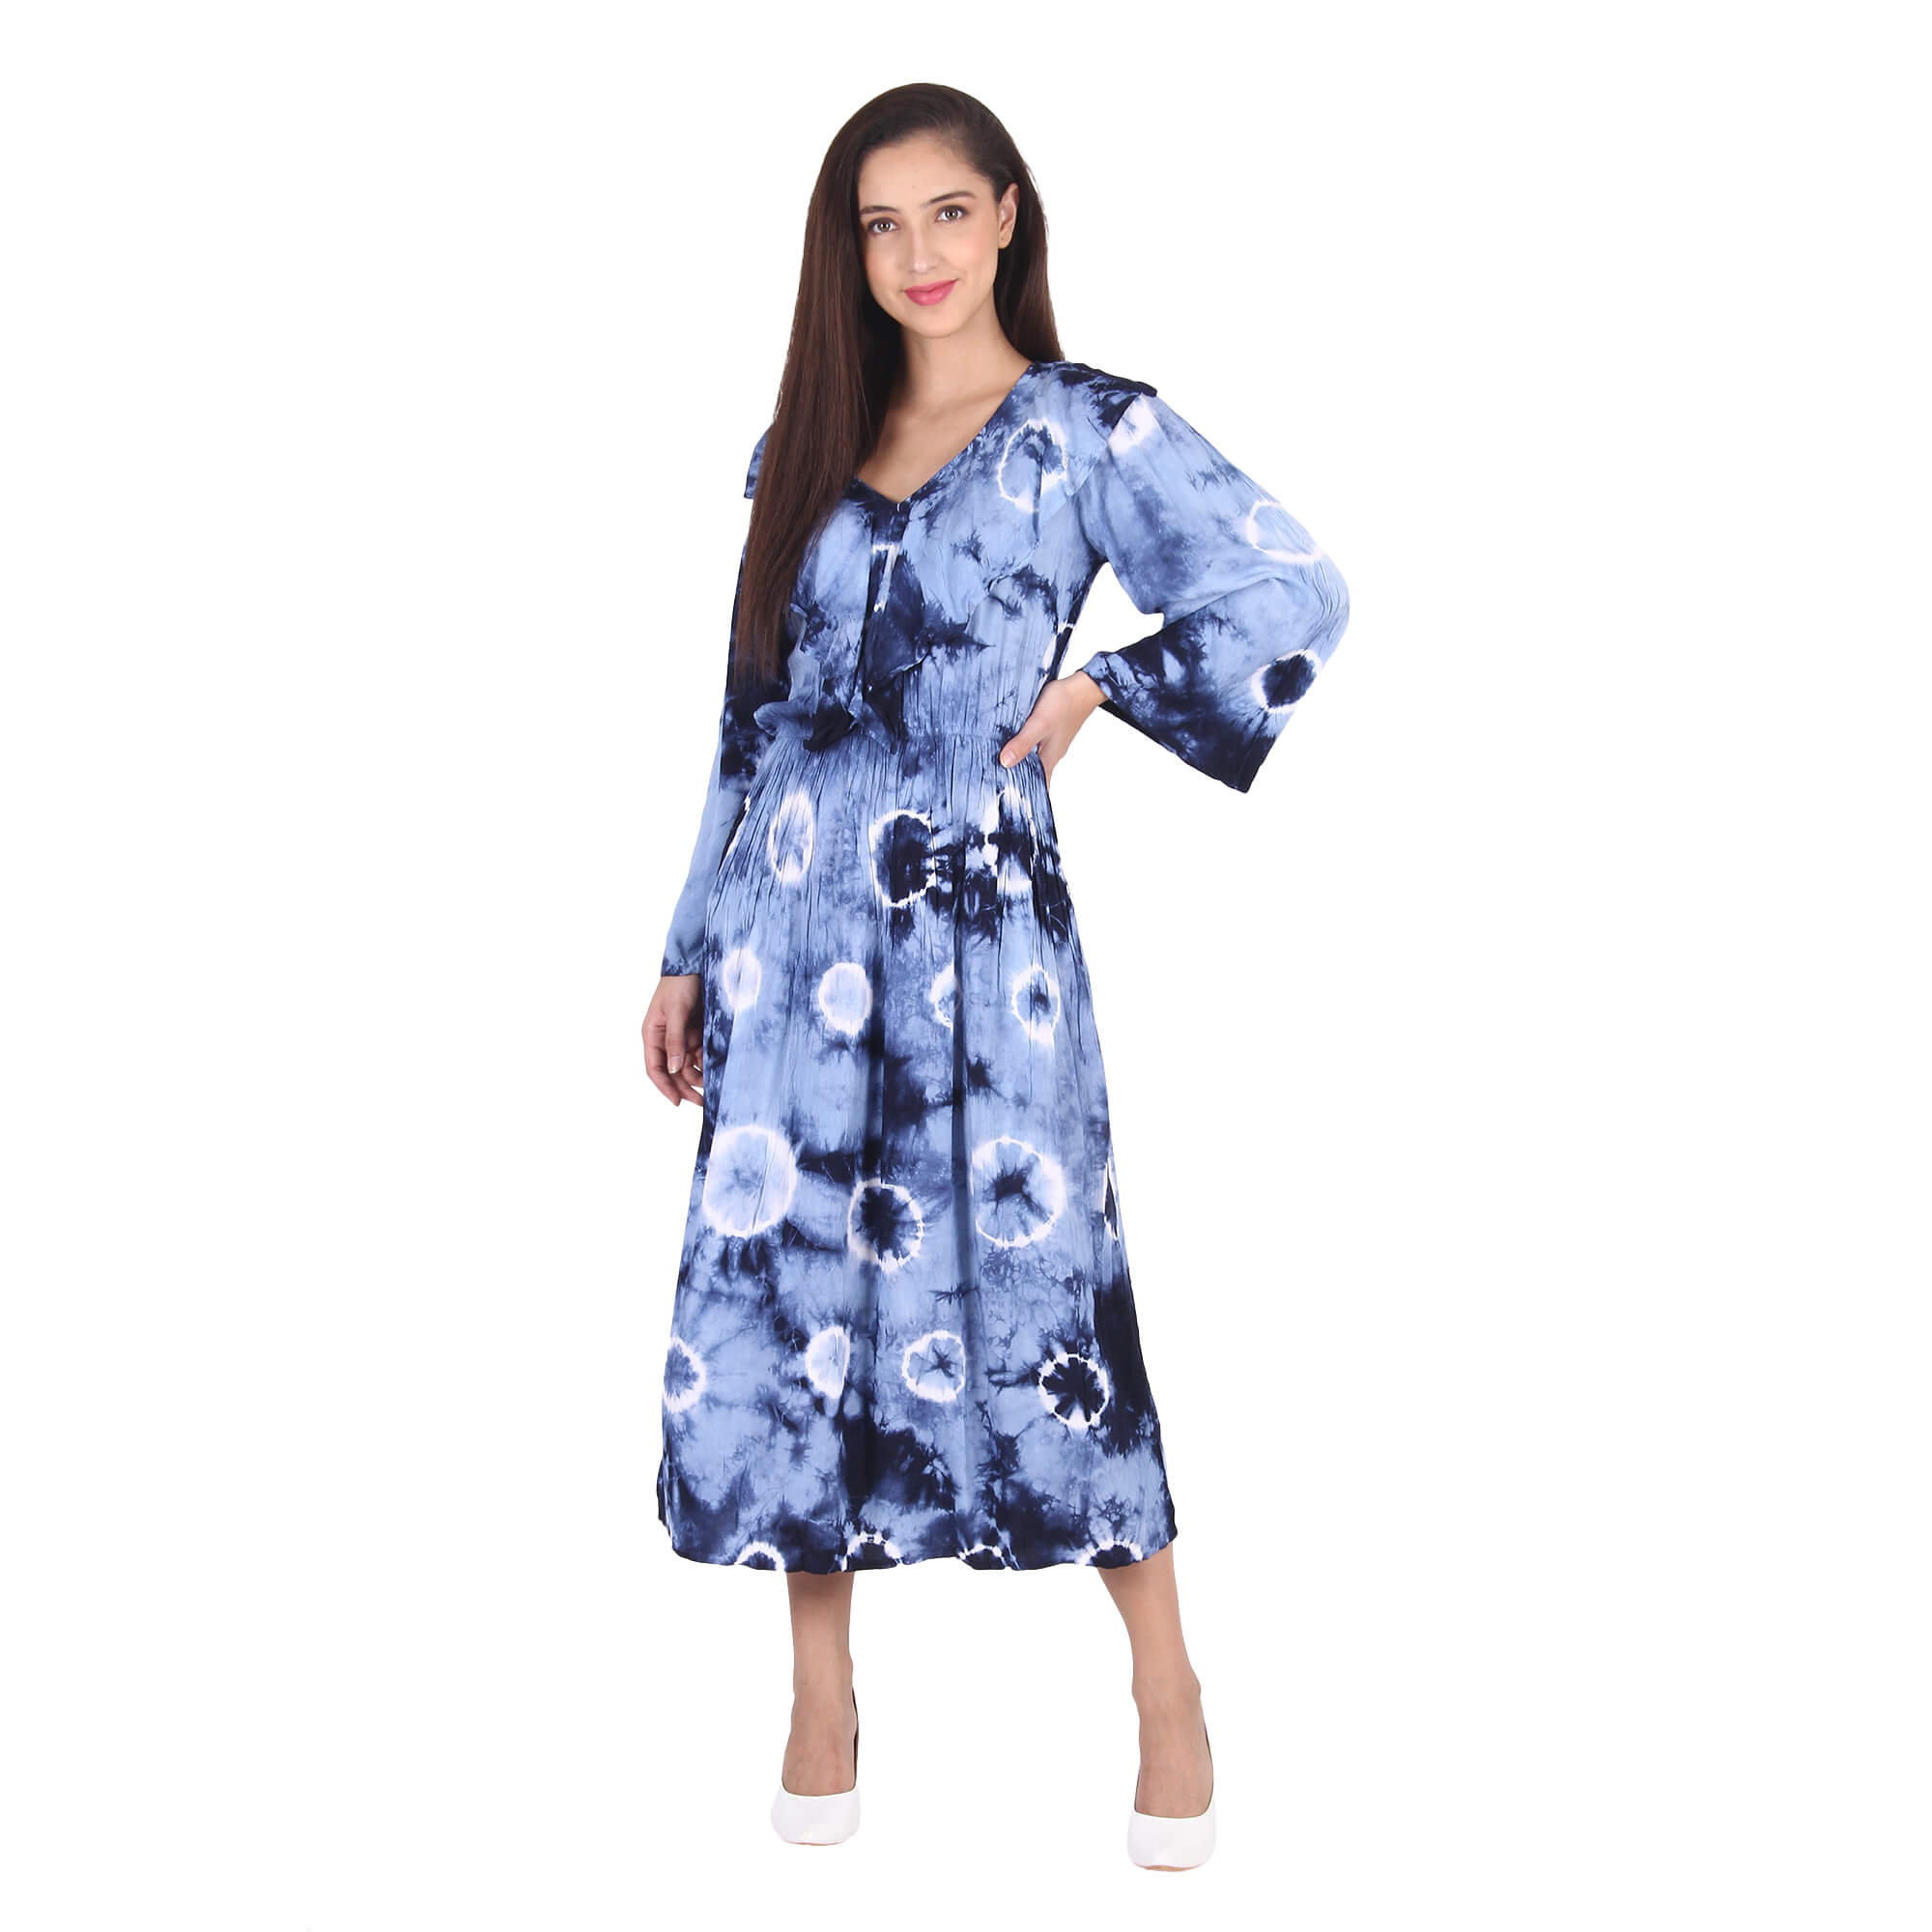 DrMaxi Boho Tropical Beach Vacation Floral Midi Dress Elegant Vintage  Floral Chiffon Floral Midi Dress For Womens Summer 2021 Casual Party X0621  From Musuo03, $22.51 | DHgate.Com